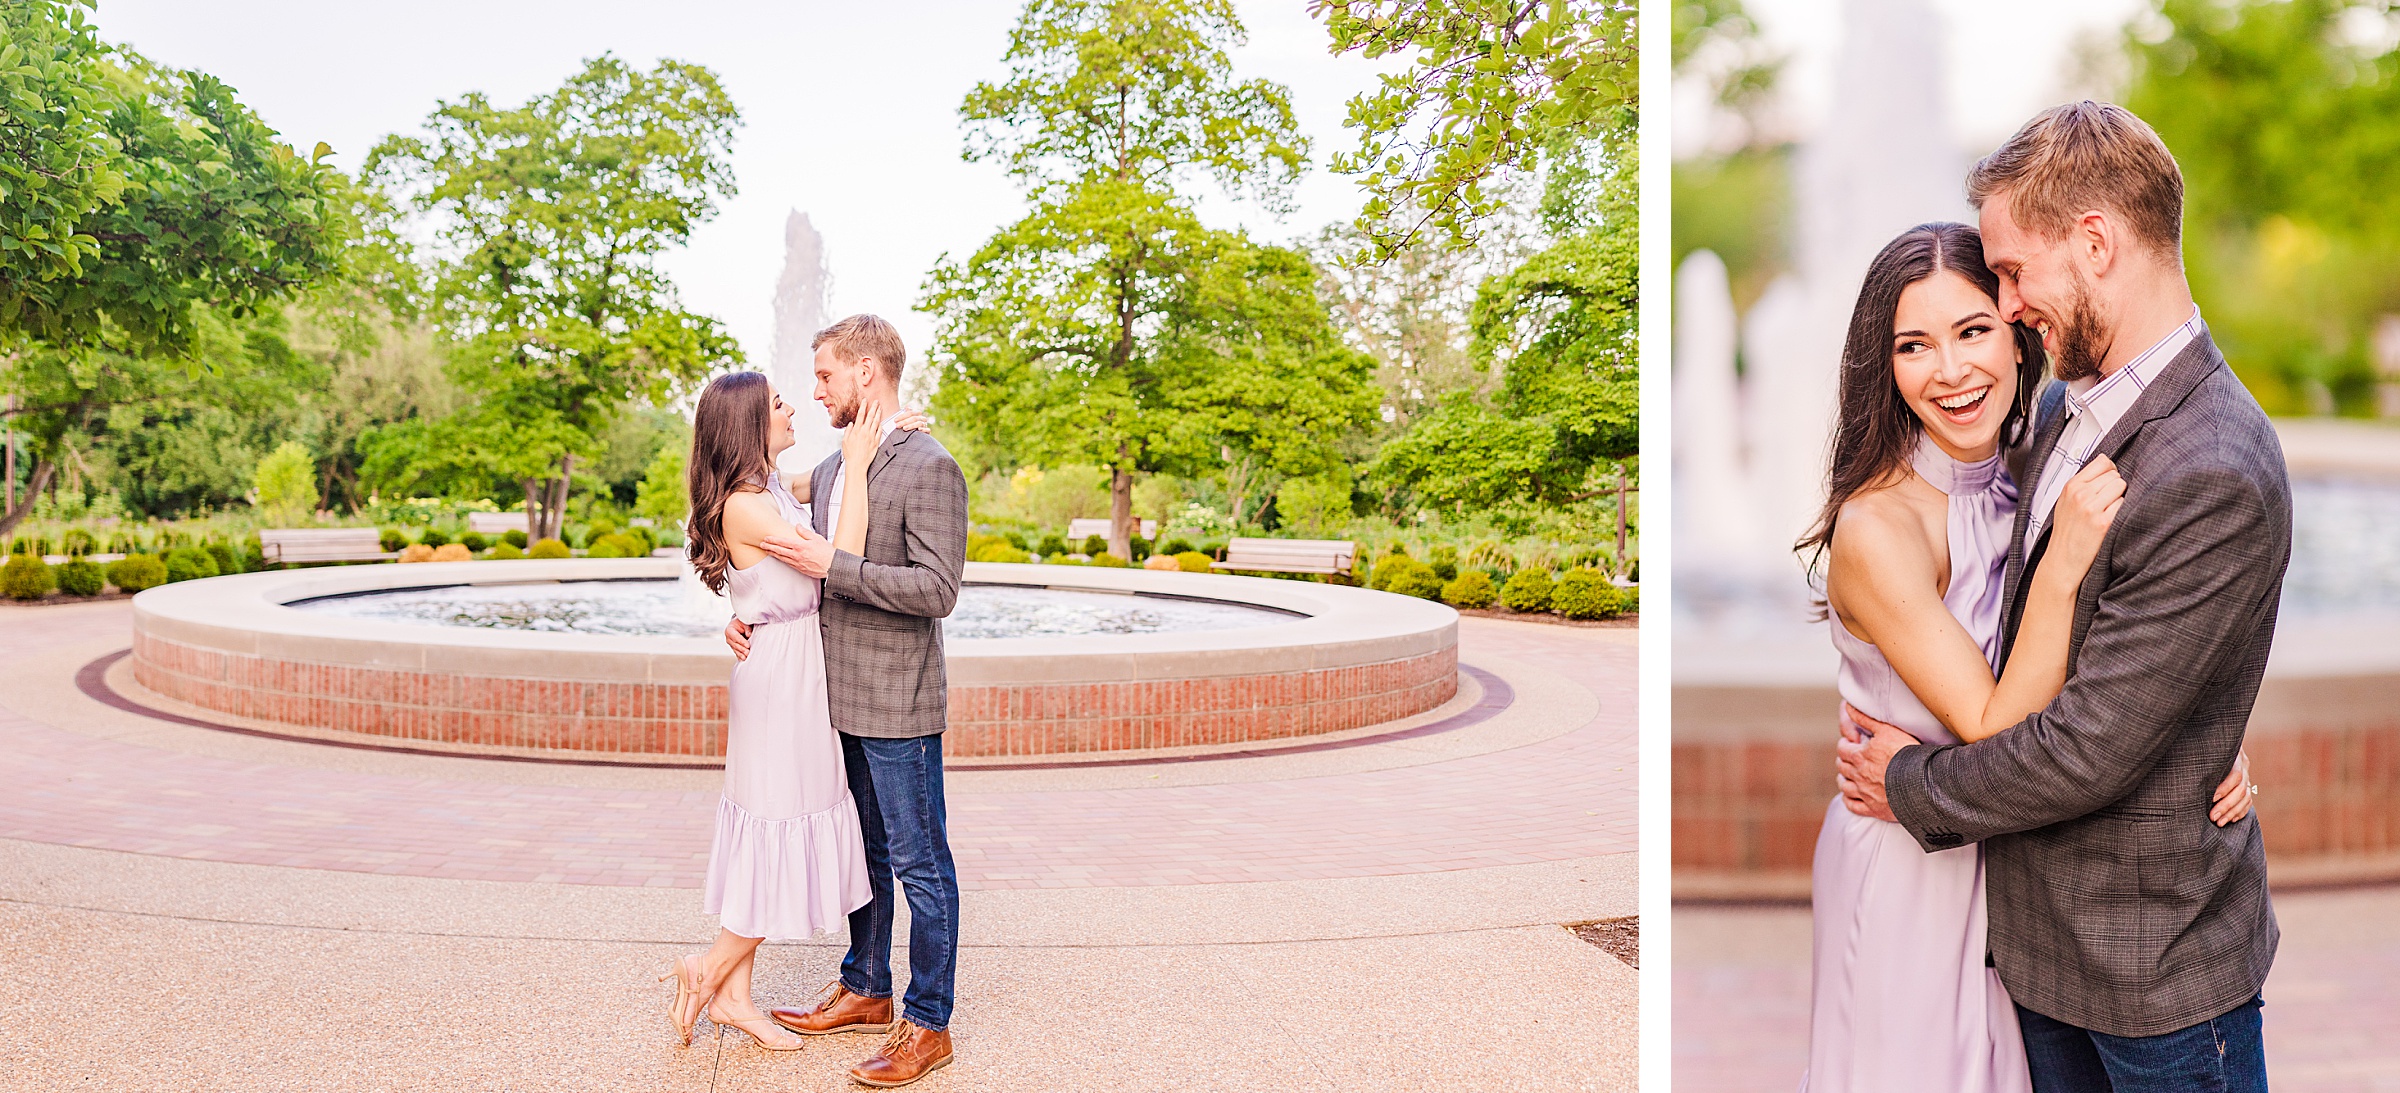 Couple Celebrate their engagement in Cantigny Park in Wheaton, Illinois. Photo taken by Austin Wedding Photographers, Joanna and Brett